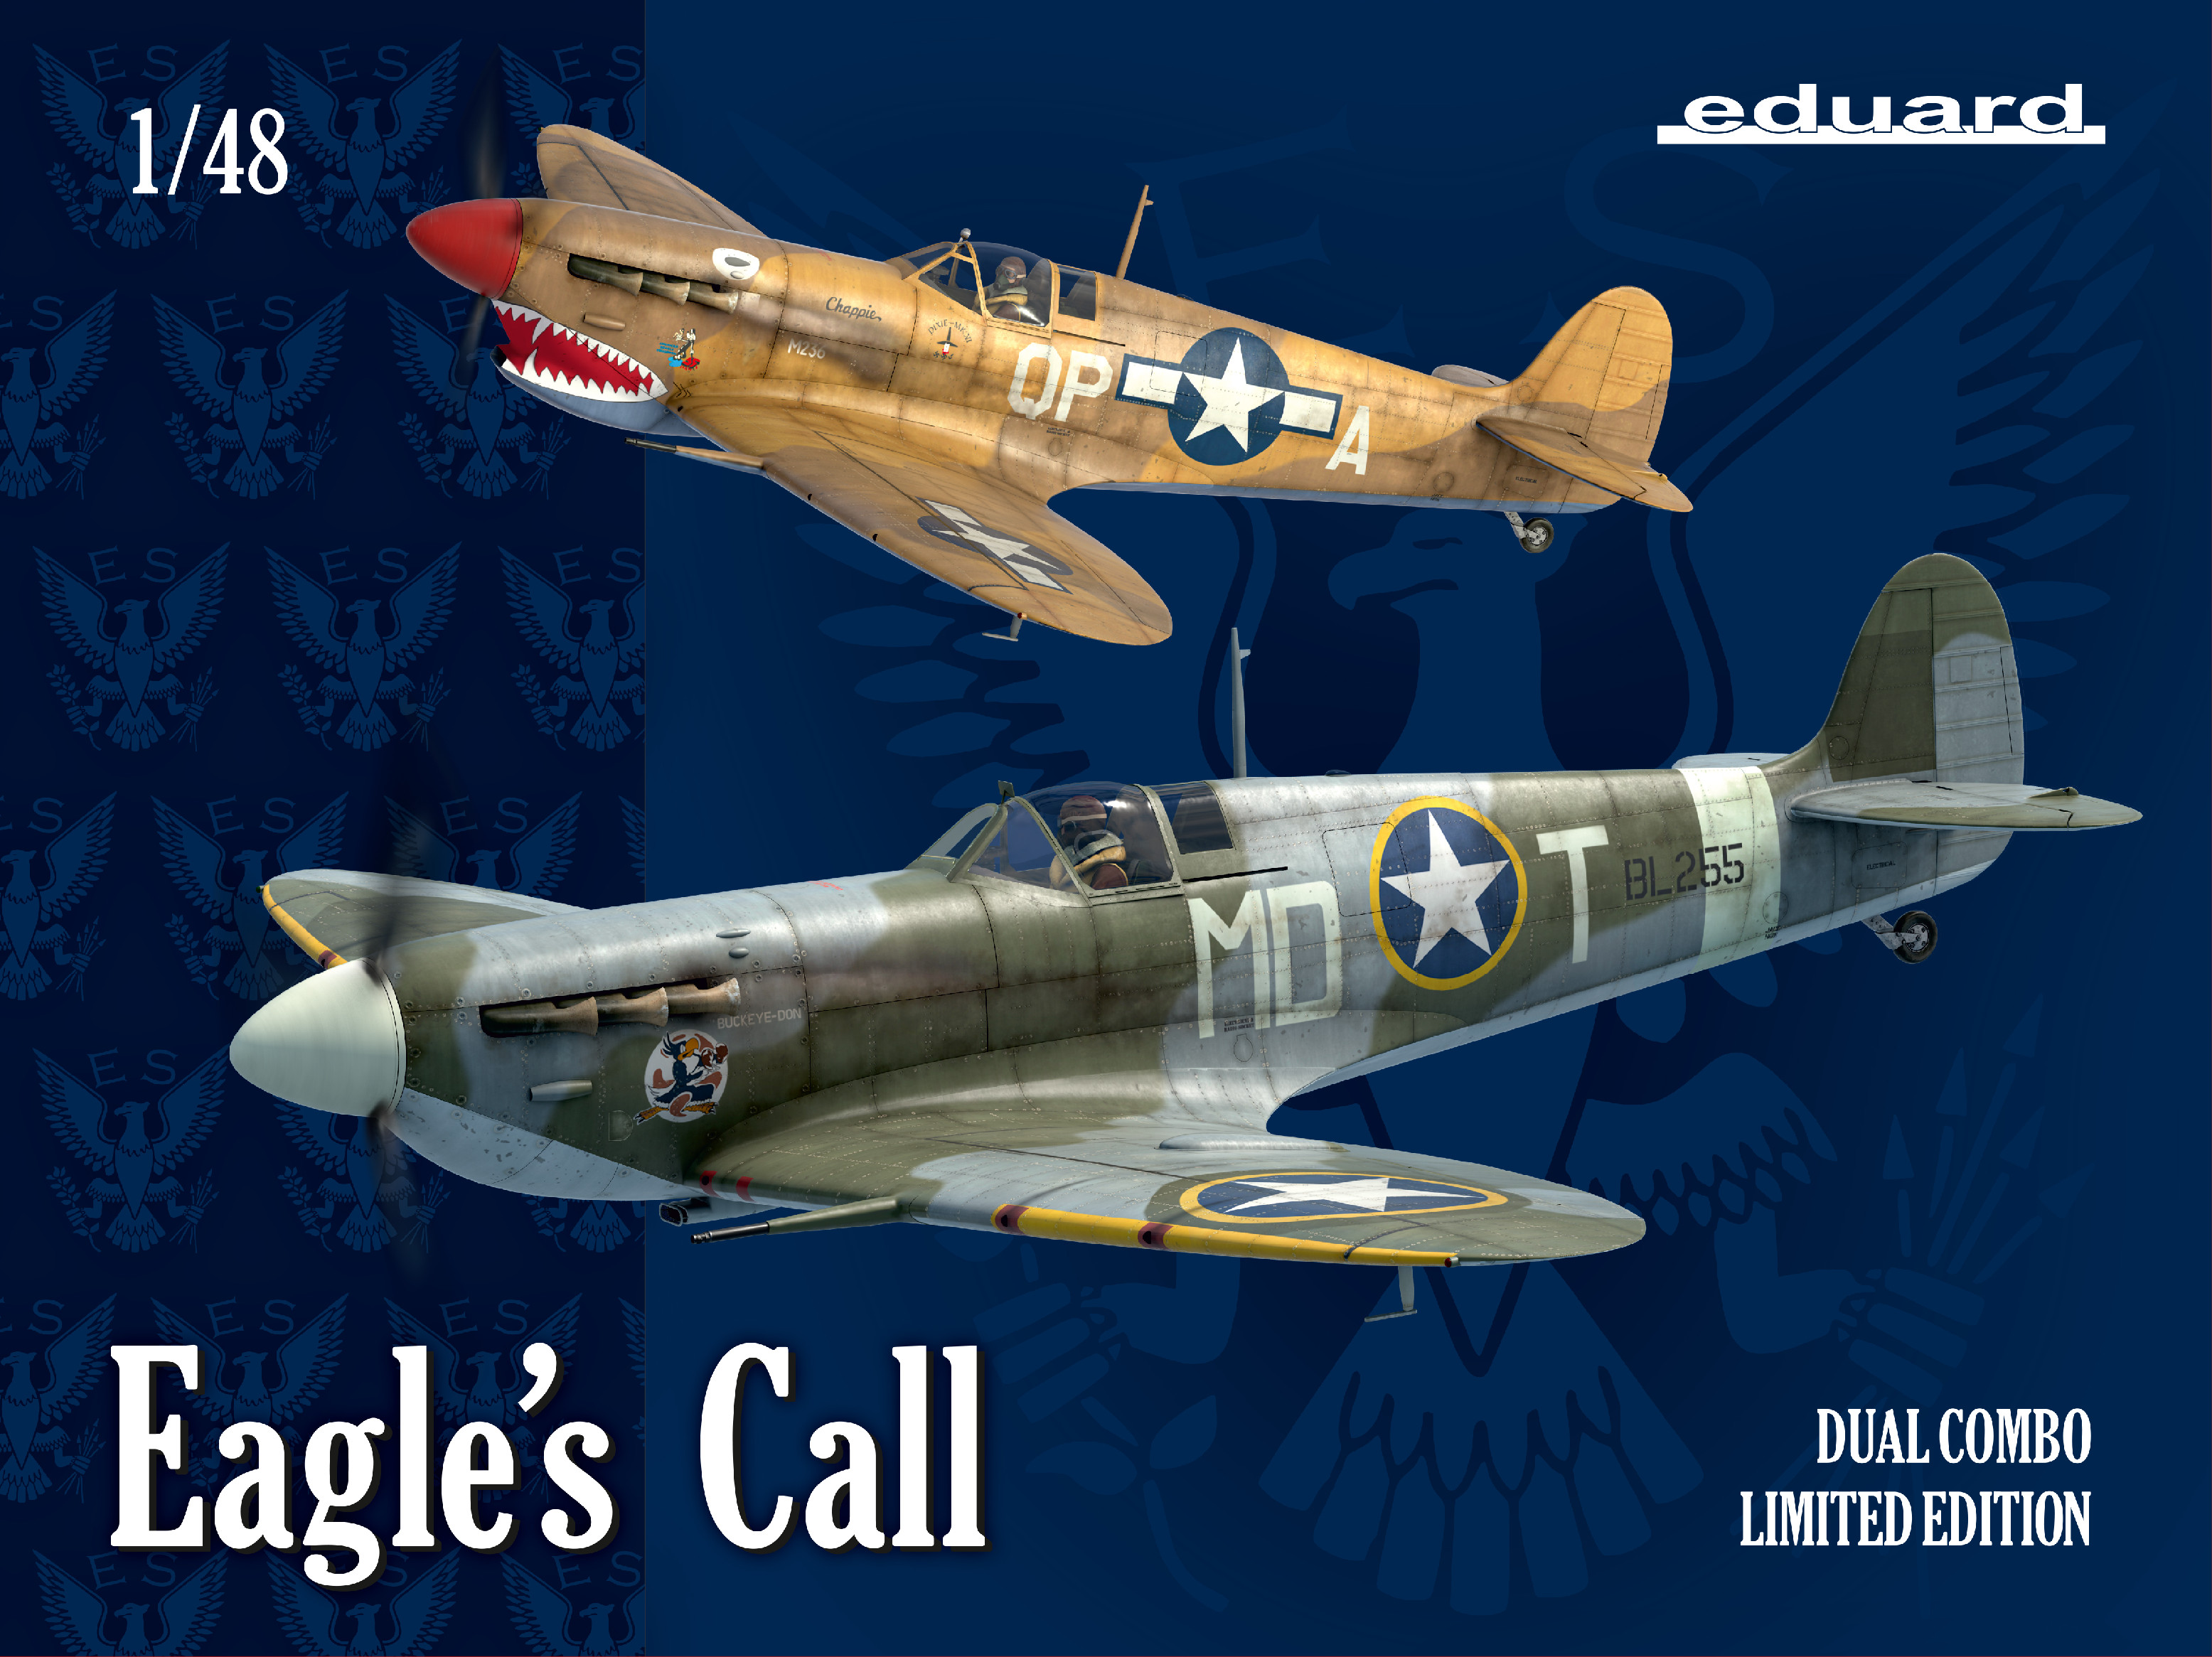 1/48 EAGLE´s CALL - Spitfire Mk.Vb a Vc (Limited Edition)